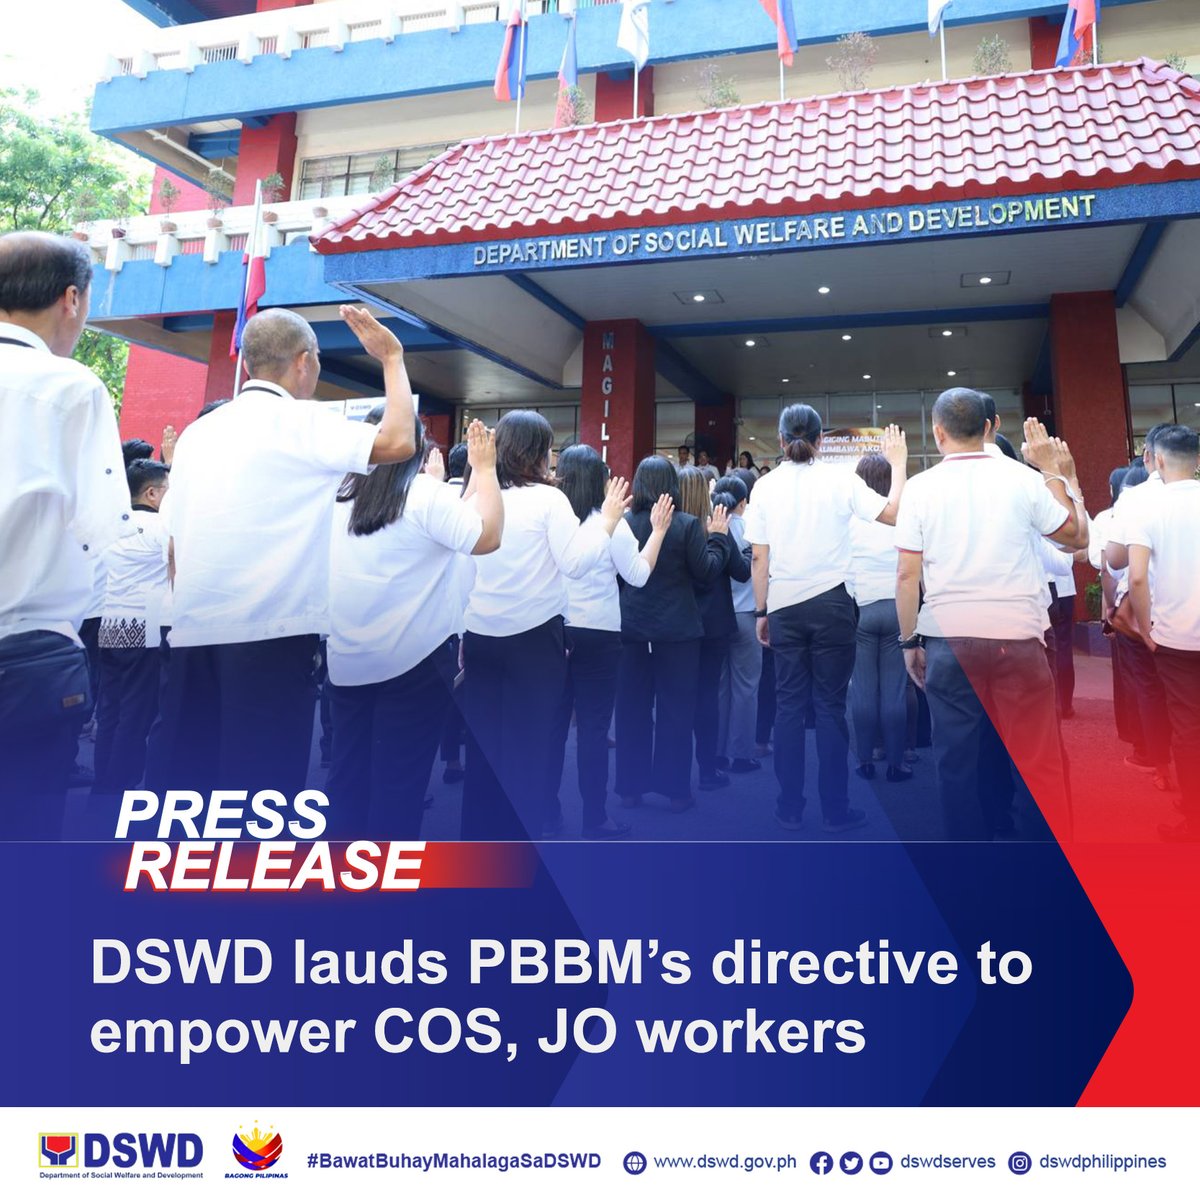 𝗗𝗦𝗪𝗗 𝗣𝗥𝗘𝗦𝗦 𝗥𝗘𝗟𝗘𝗔𝗦𝗘: DSWD lauds PBBM’s directive to empower COS, JO workers The Department of Social Welfare and Development (DSWD) has lauded the recent directive from President Ferdinand R. Marcos Jr. to enhance the opportunities for Contract of Service (COS)…